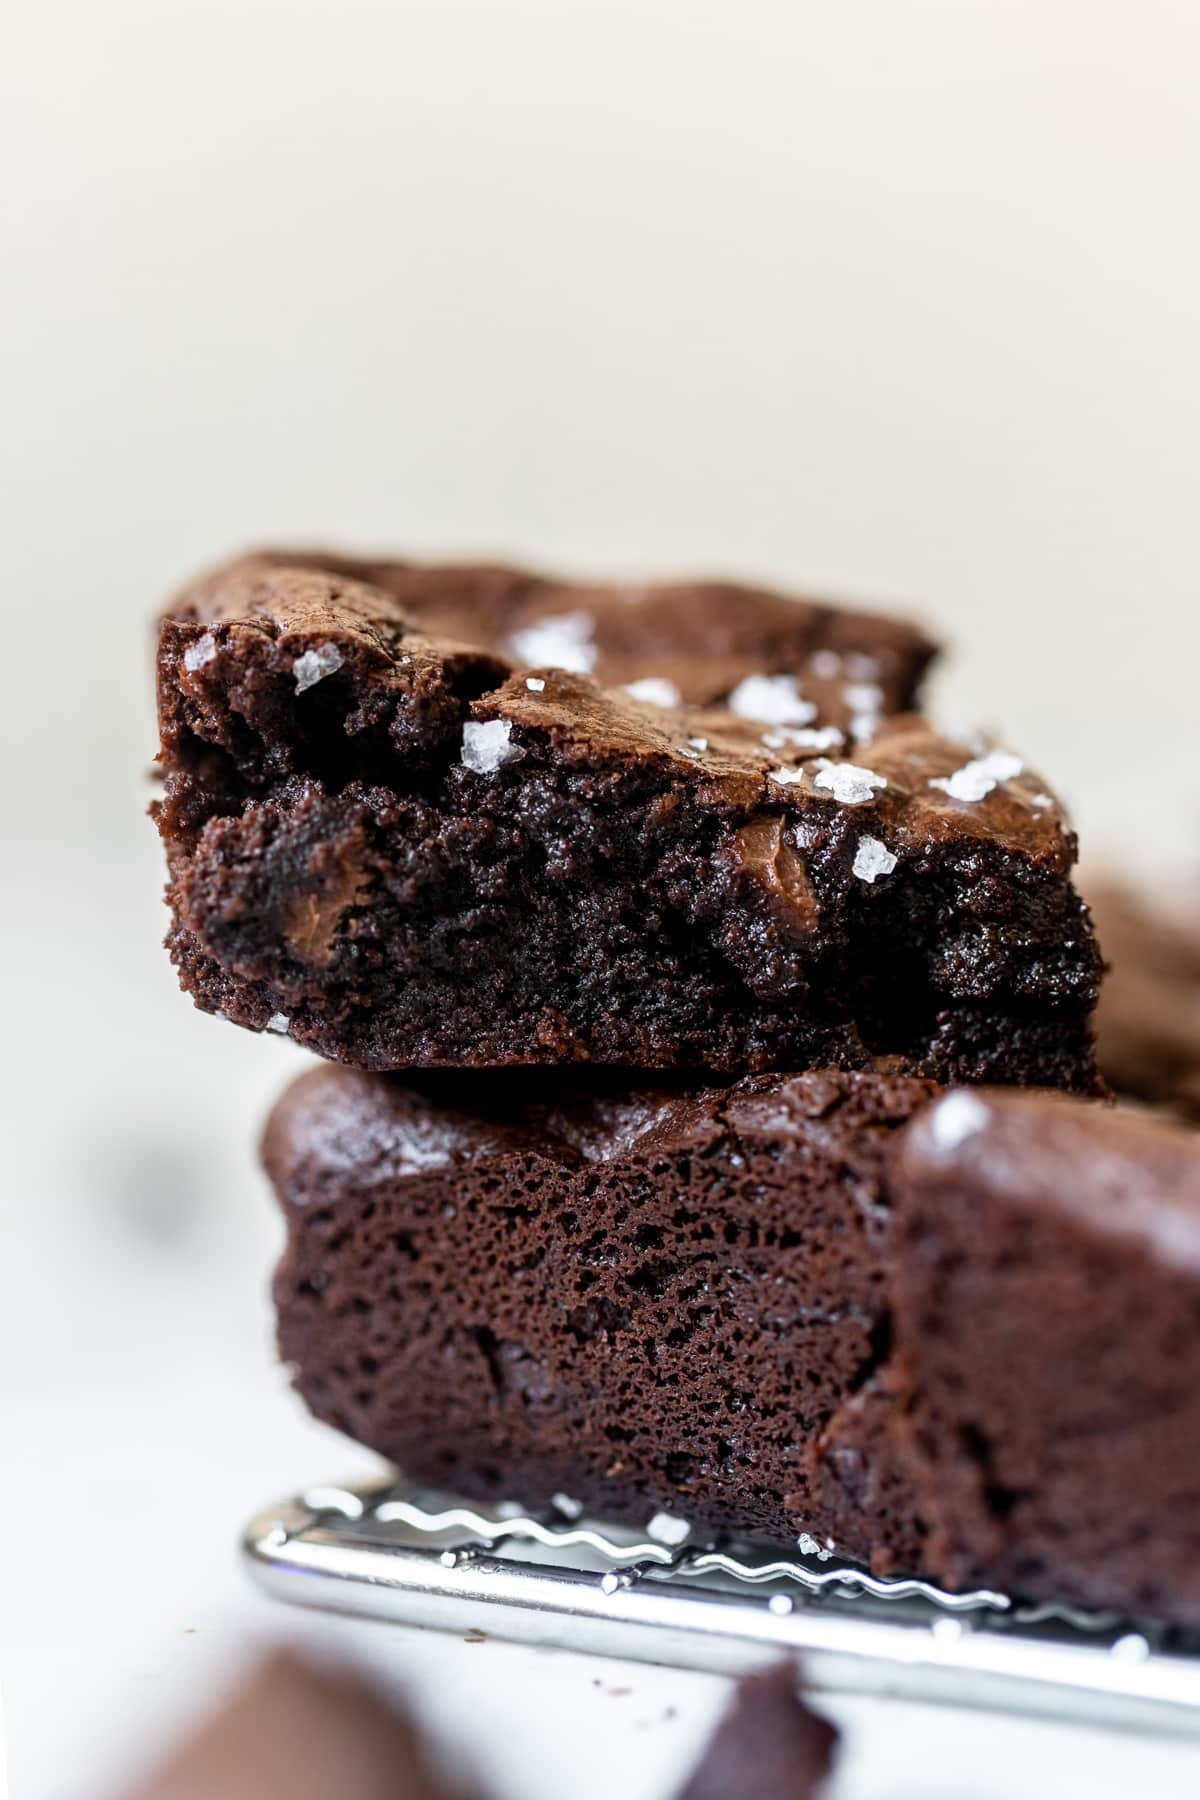 brownies stacked on top of each other close up image.